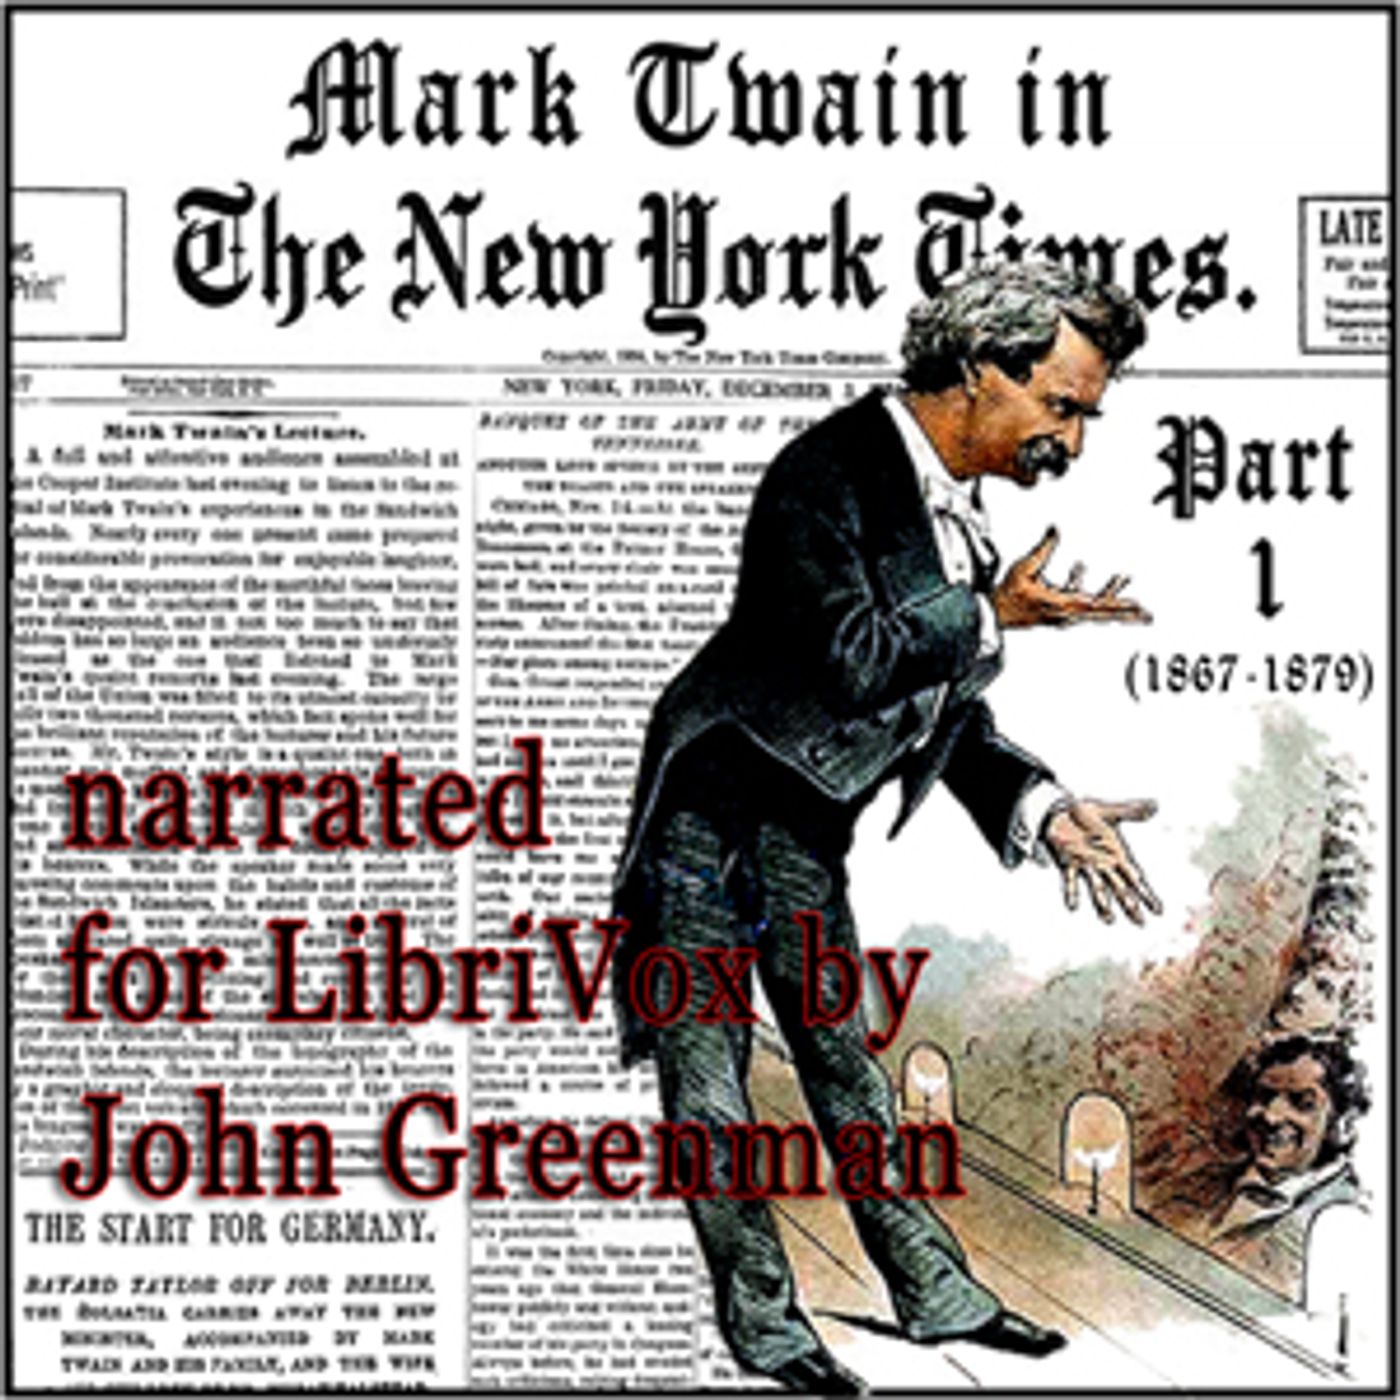 Mark Twain in the New York Times, Part One (1867-1879) by Mark Twain (1835 – 1910) and The New York